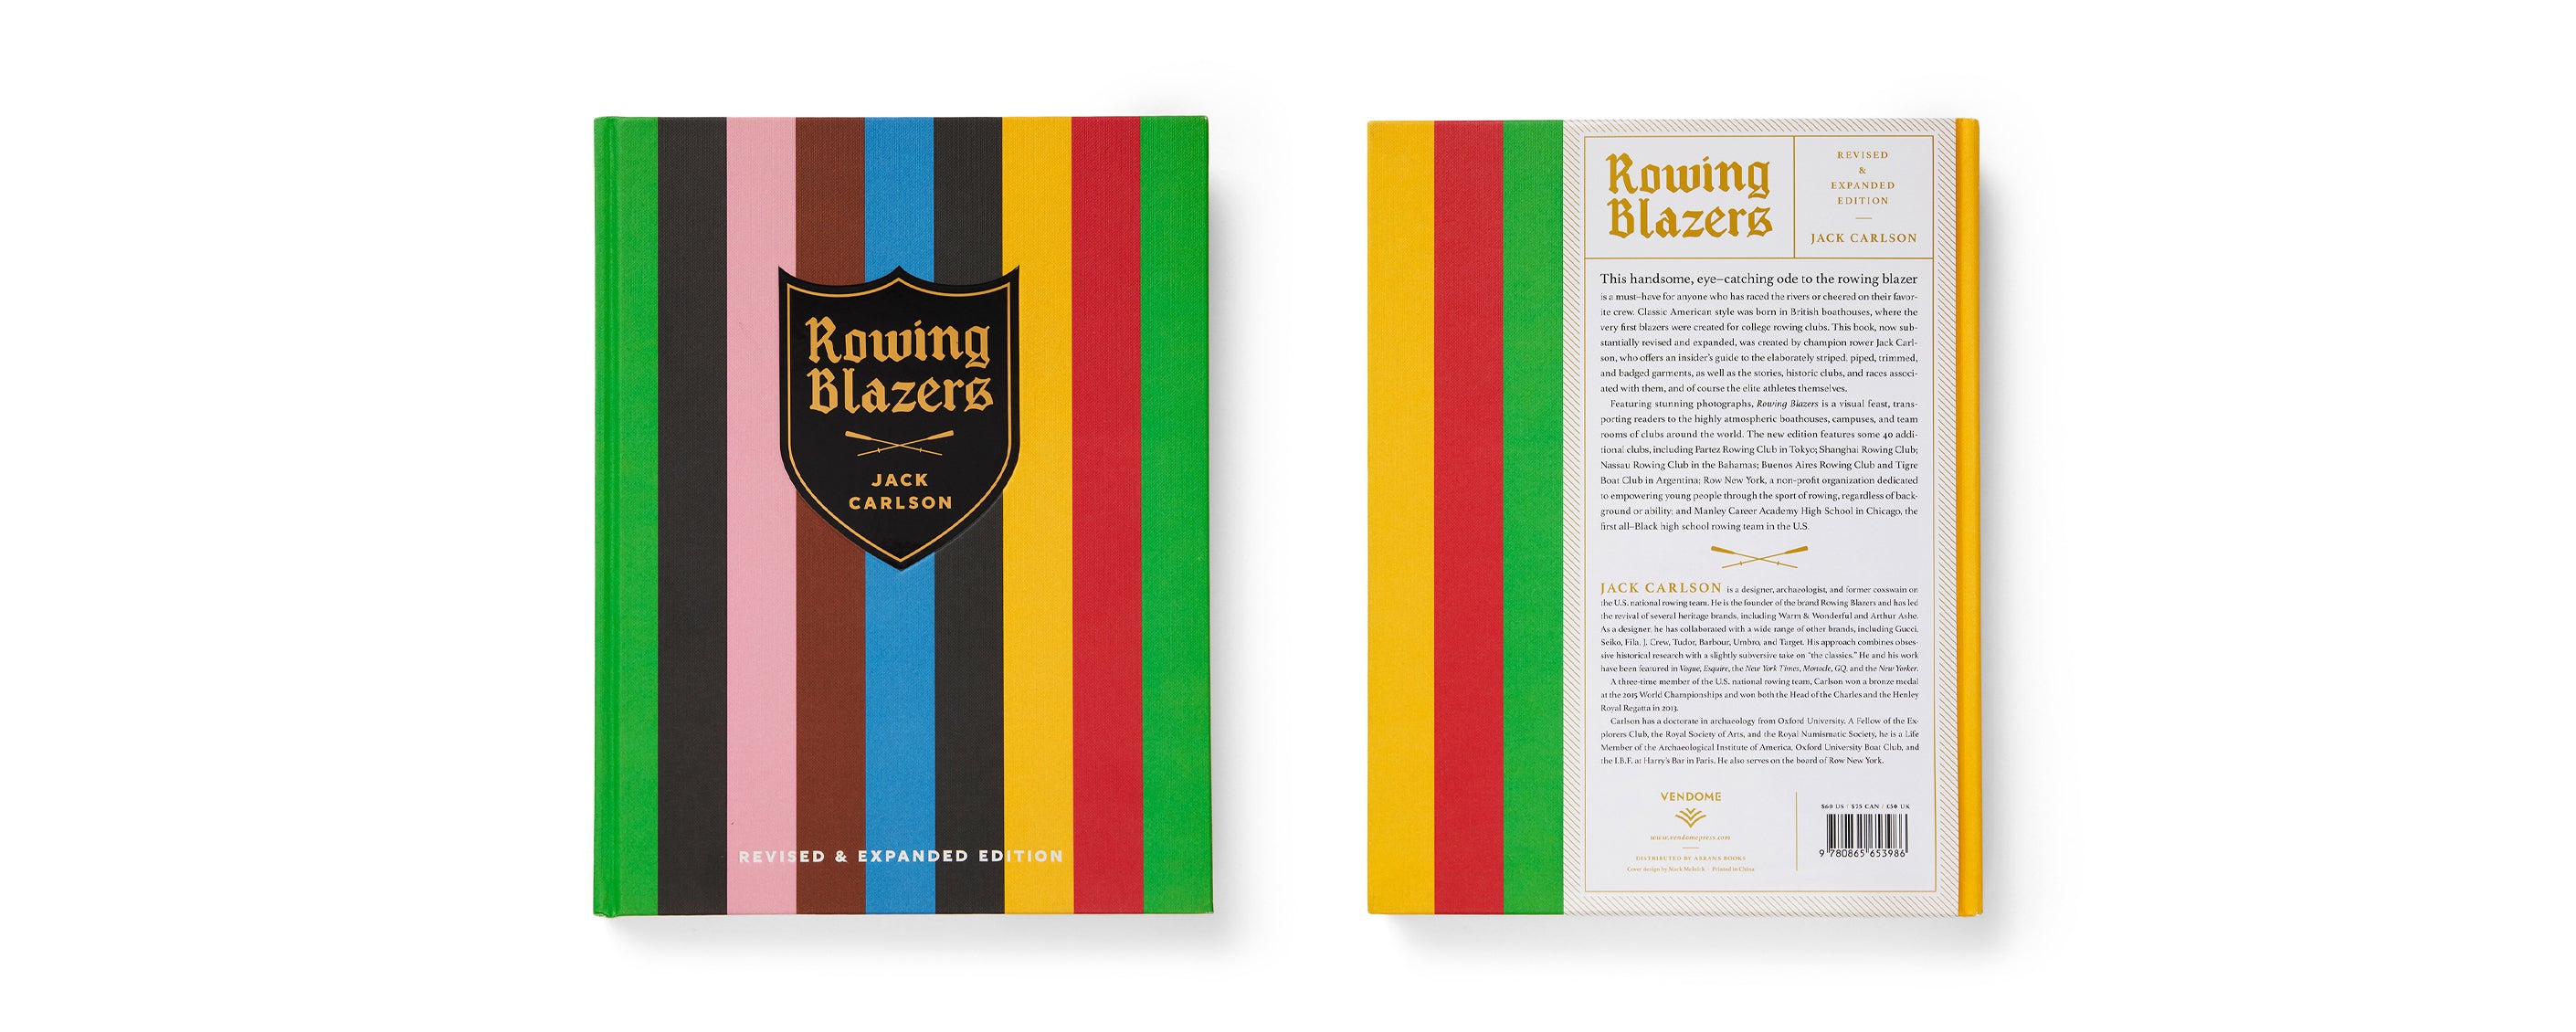 ROWING BLAZERS: REVISED AND EXPANDED EDITION – Rowing Blazers